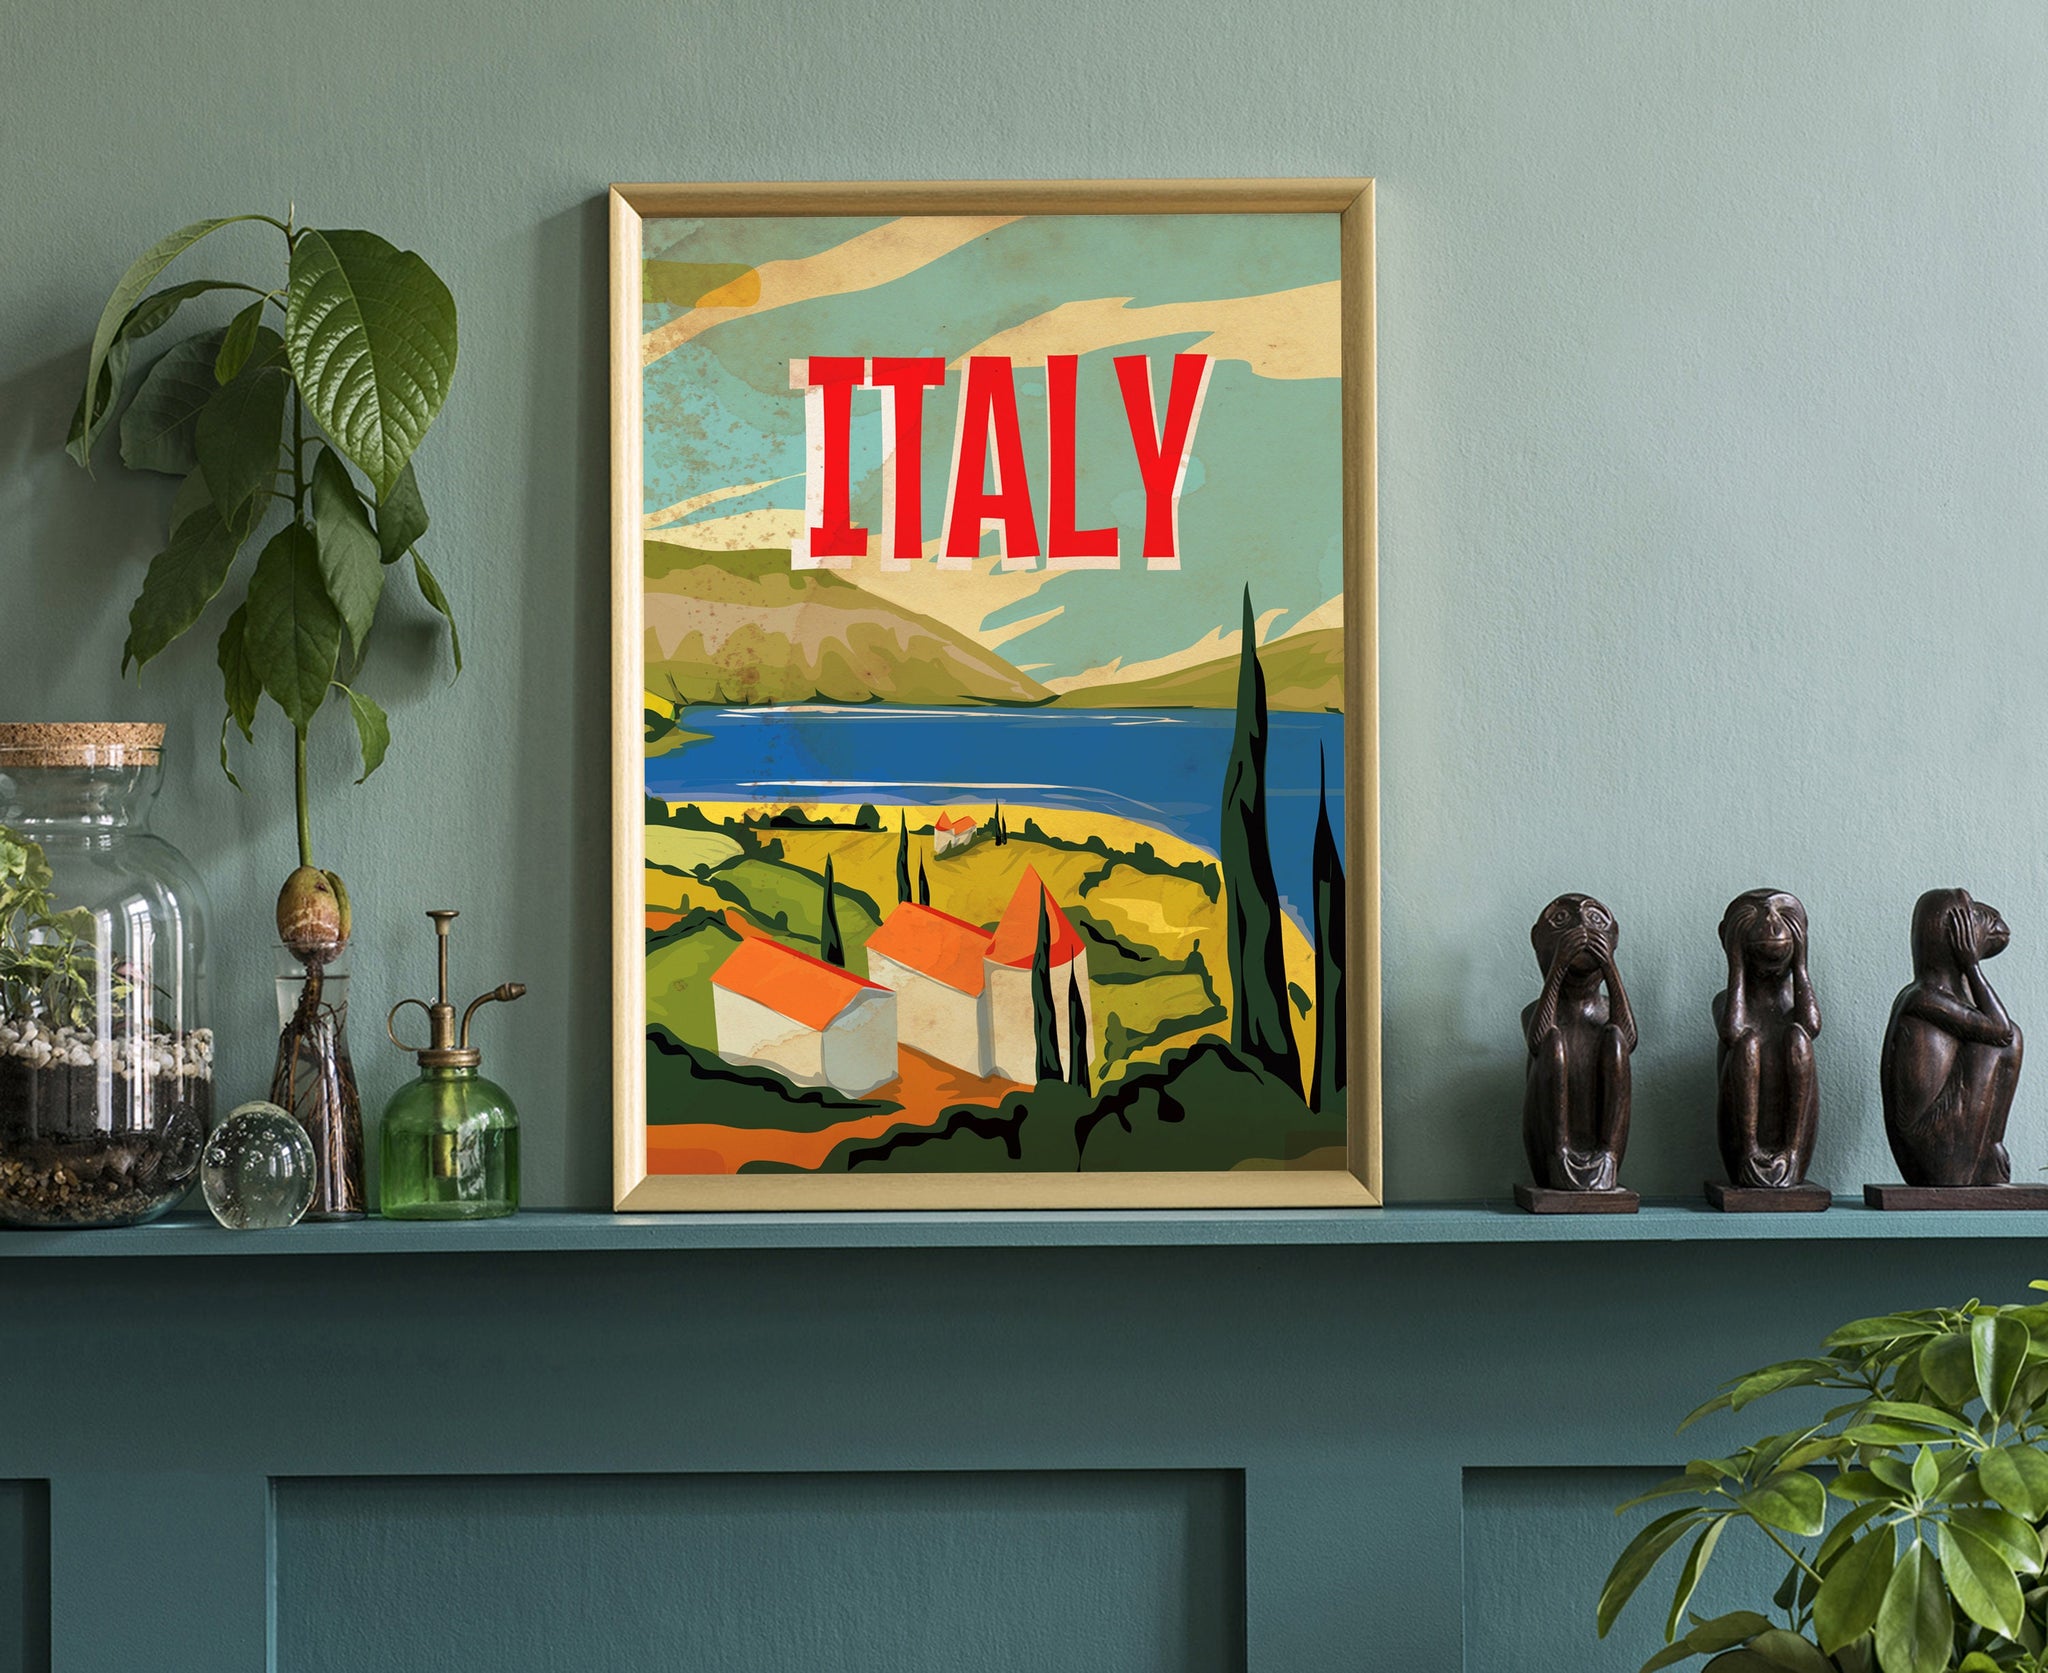 ITALY travel poster, Italy cityscape and landmark poster wall Art, Home wall art, Office wall decoration, Housewarming gifts, poster print